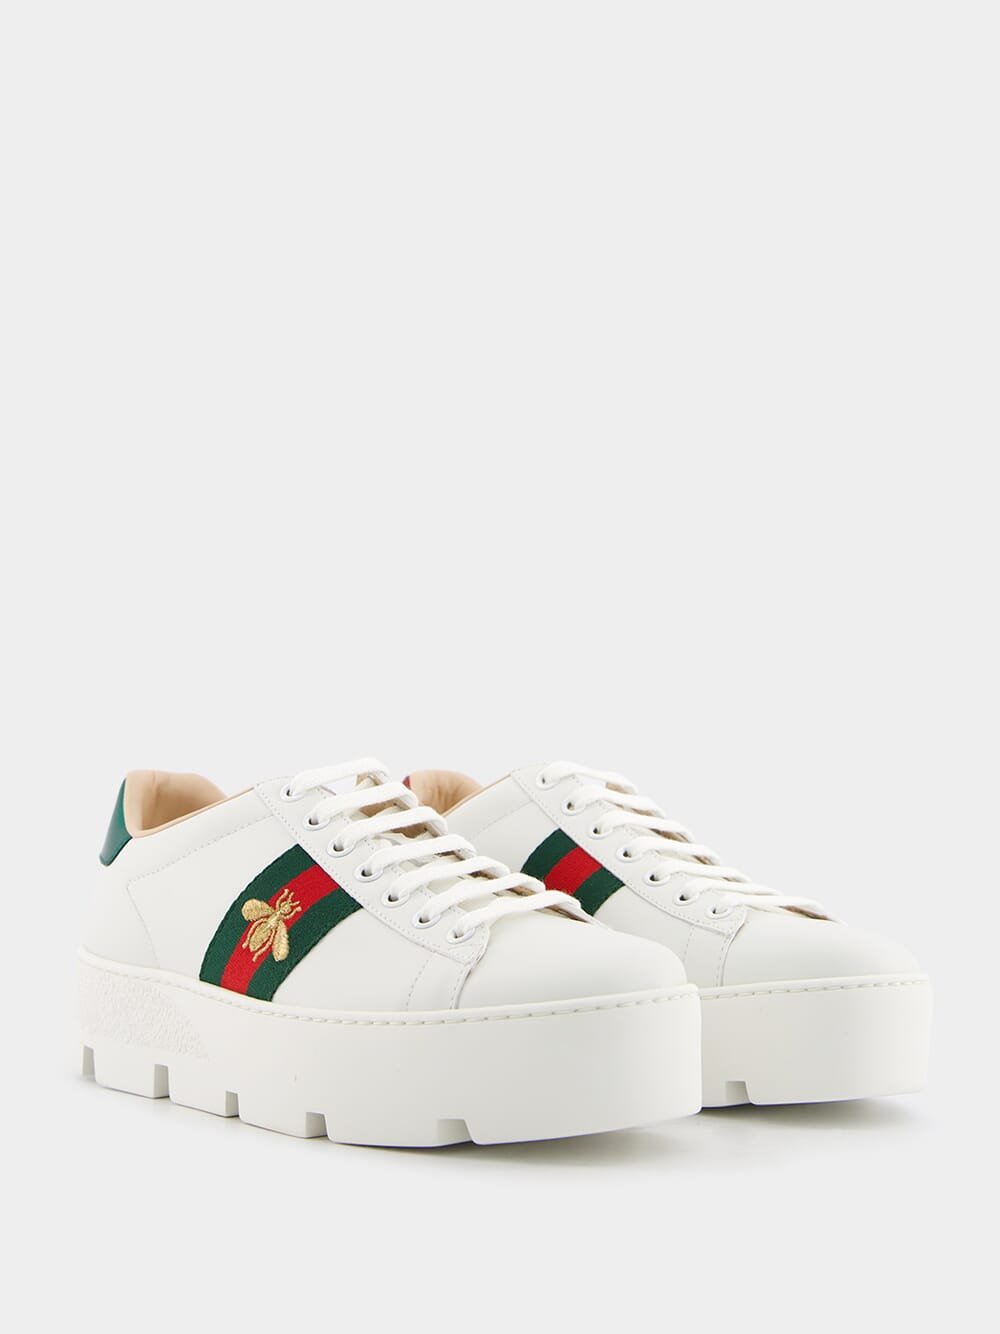 GucciEmbroidered Platform Sneakers at Fashion Clinic